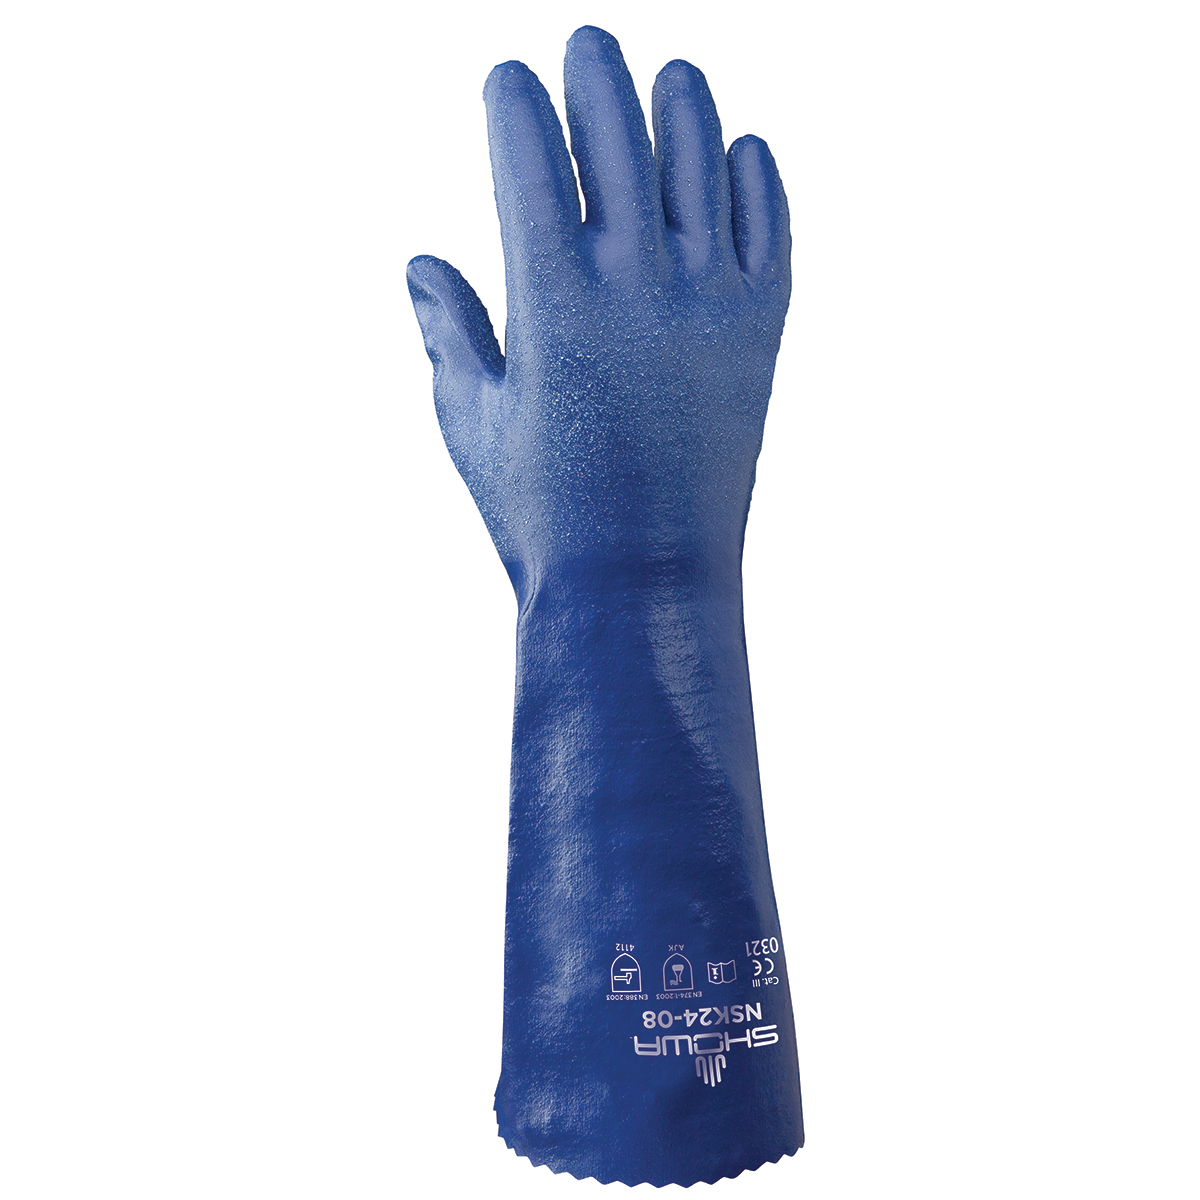 SHOWA® Size 8 Blue Cotton Lined Nitrile Chemical Resistant Gloves